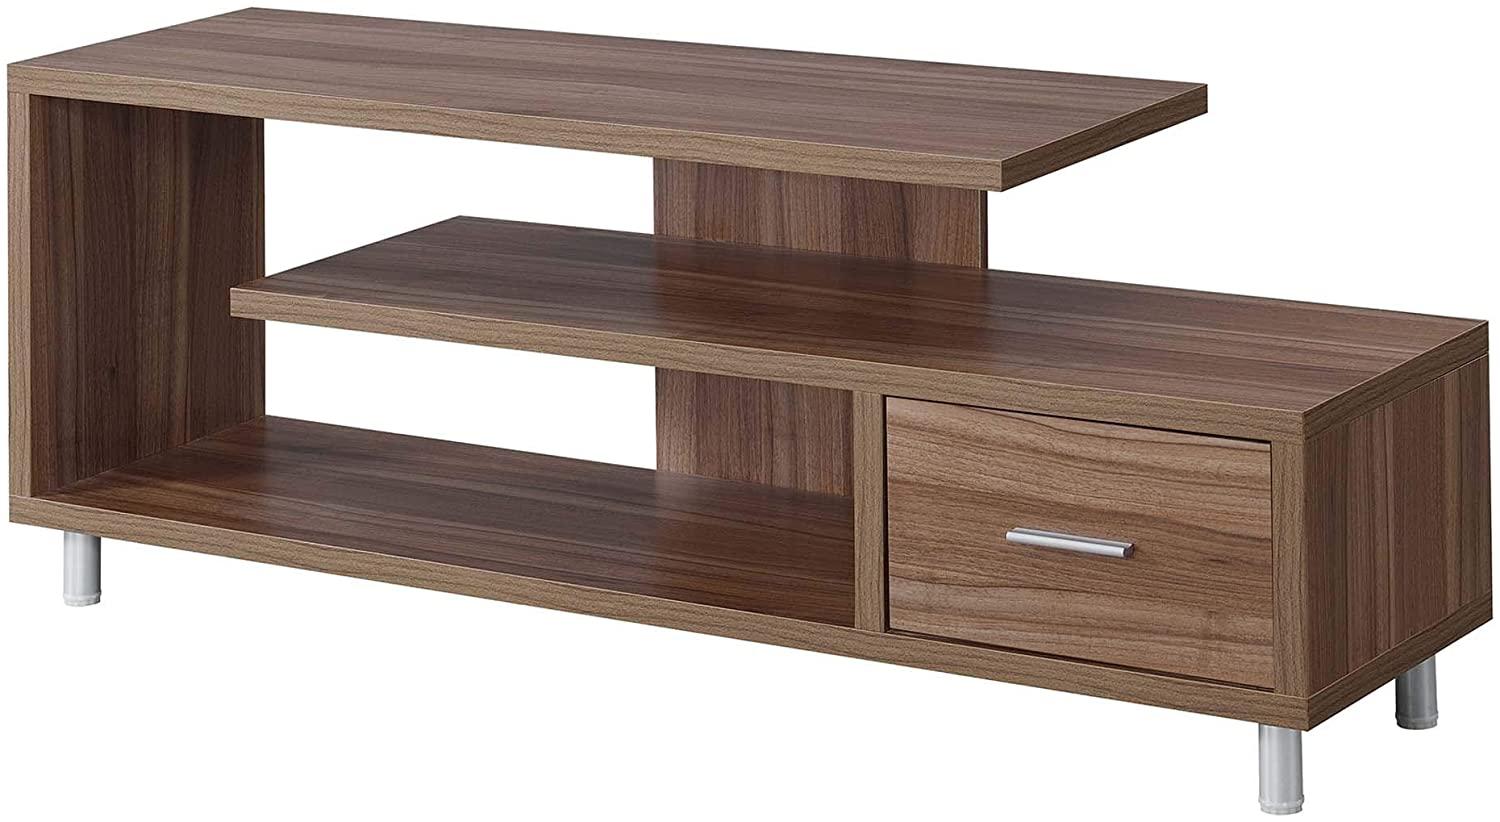 Convenience Concepts Seal II 60in TV Stand for $109.12 Shipped